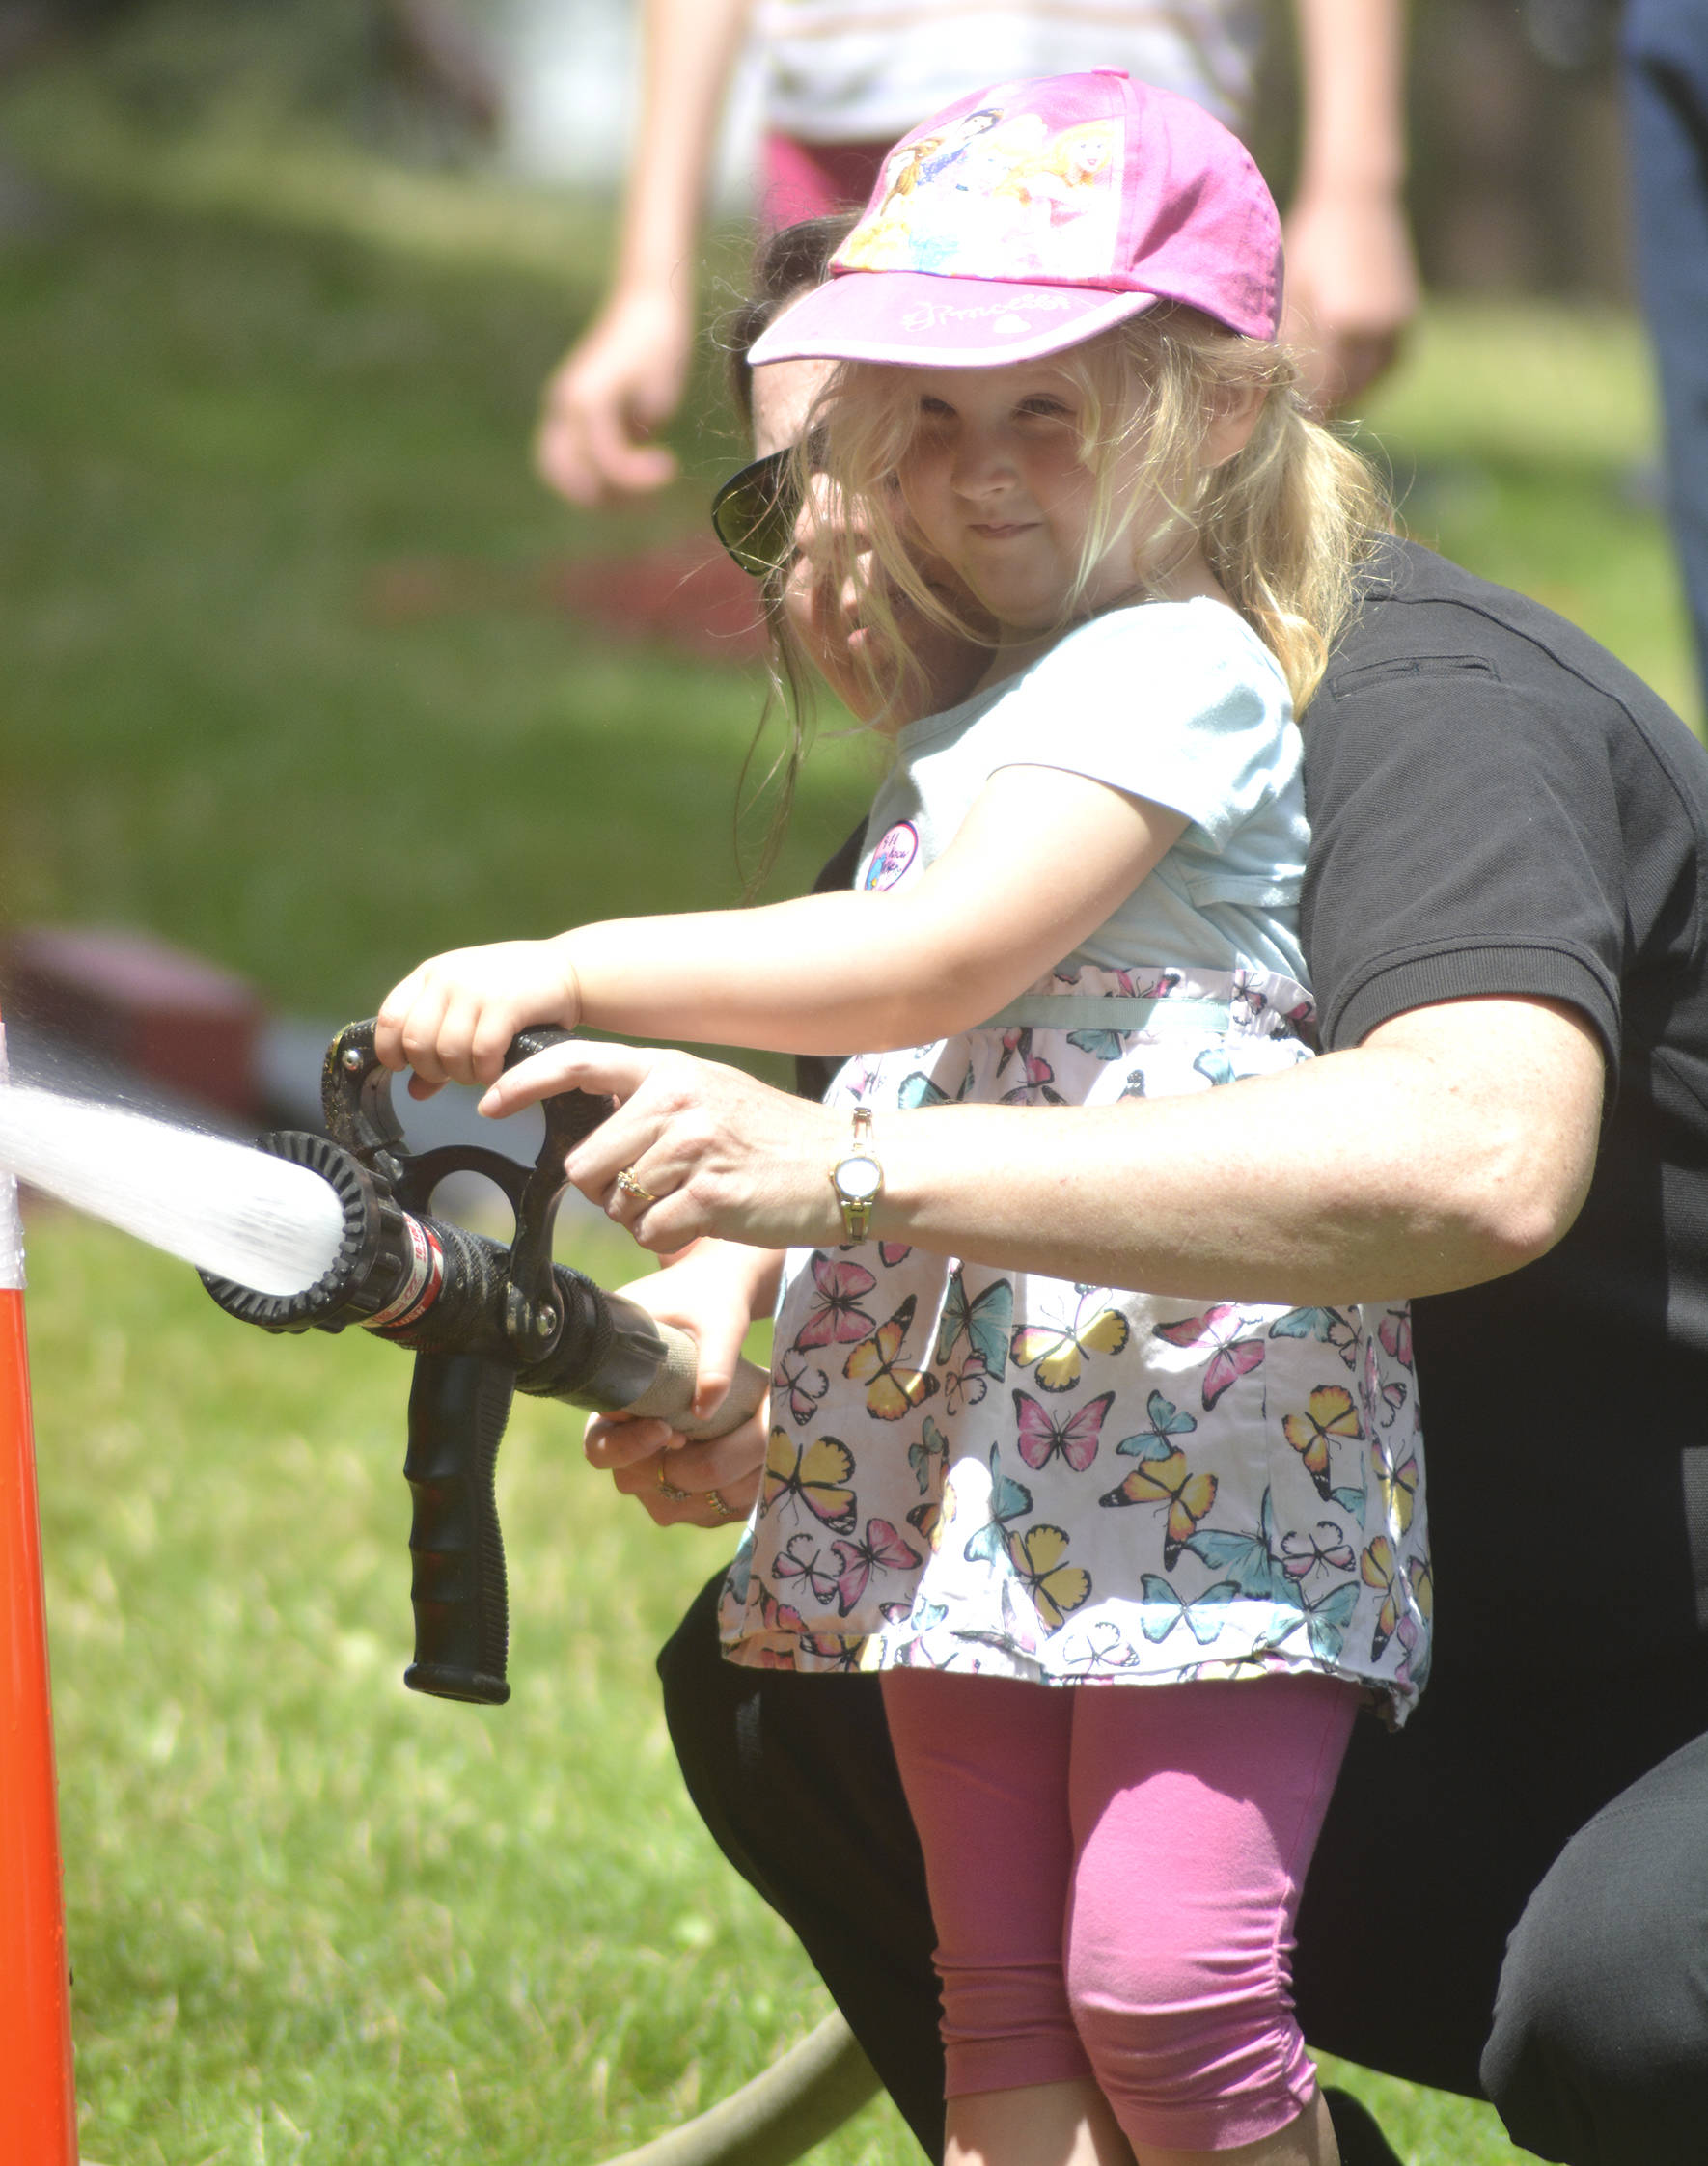 Hazel Erickson completes the Puget Sound Regional Fire Authority’s obstacle course at Maple Valley Kids’ Fest on July 13.